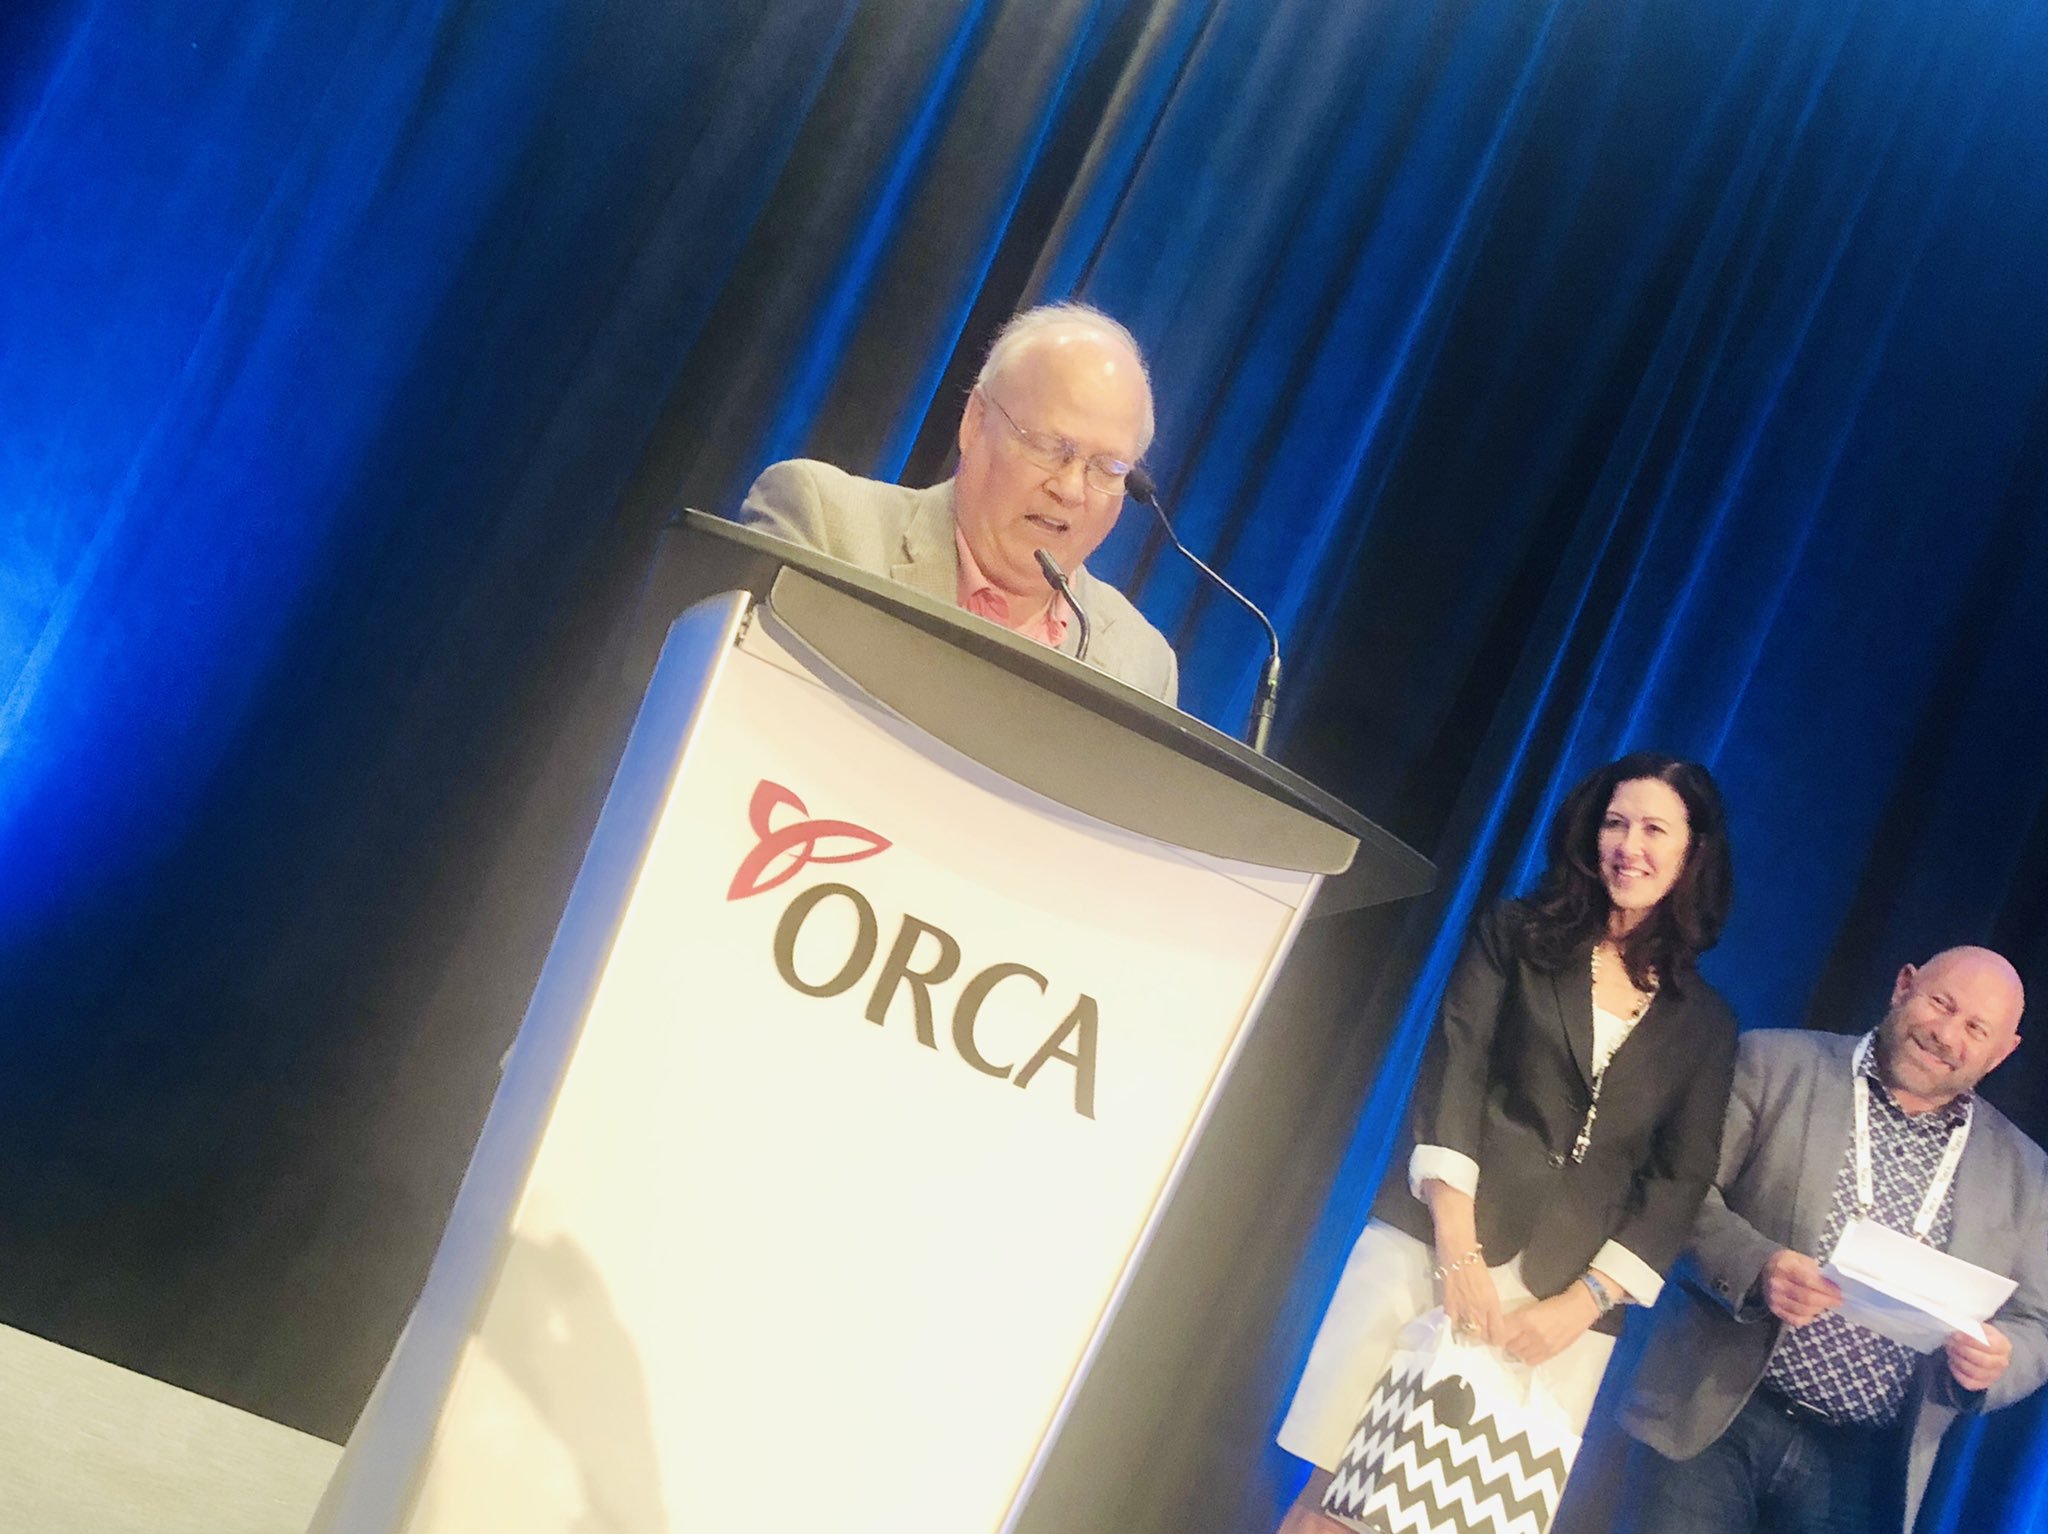 Ron Schlegel proudly accepts the Donna Holwell Legacy Award, presented by the Ontario Retirement Communities Association.